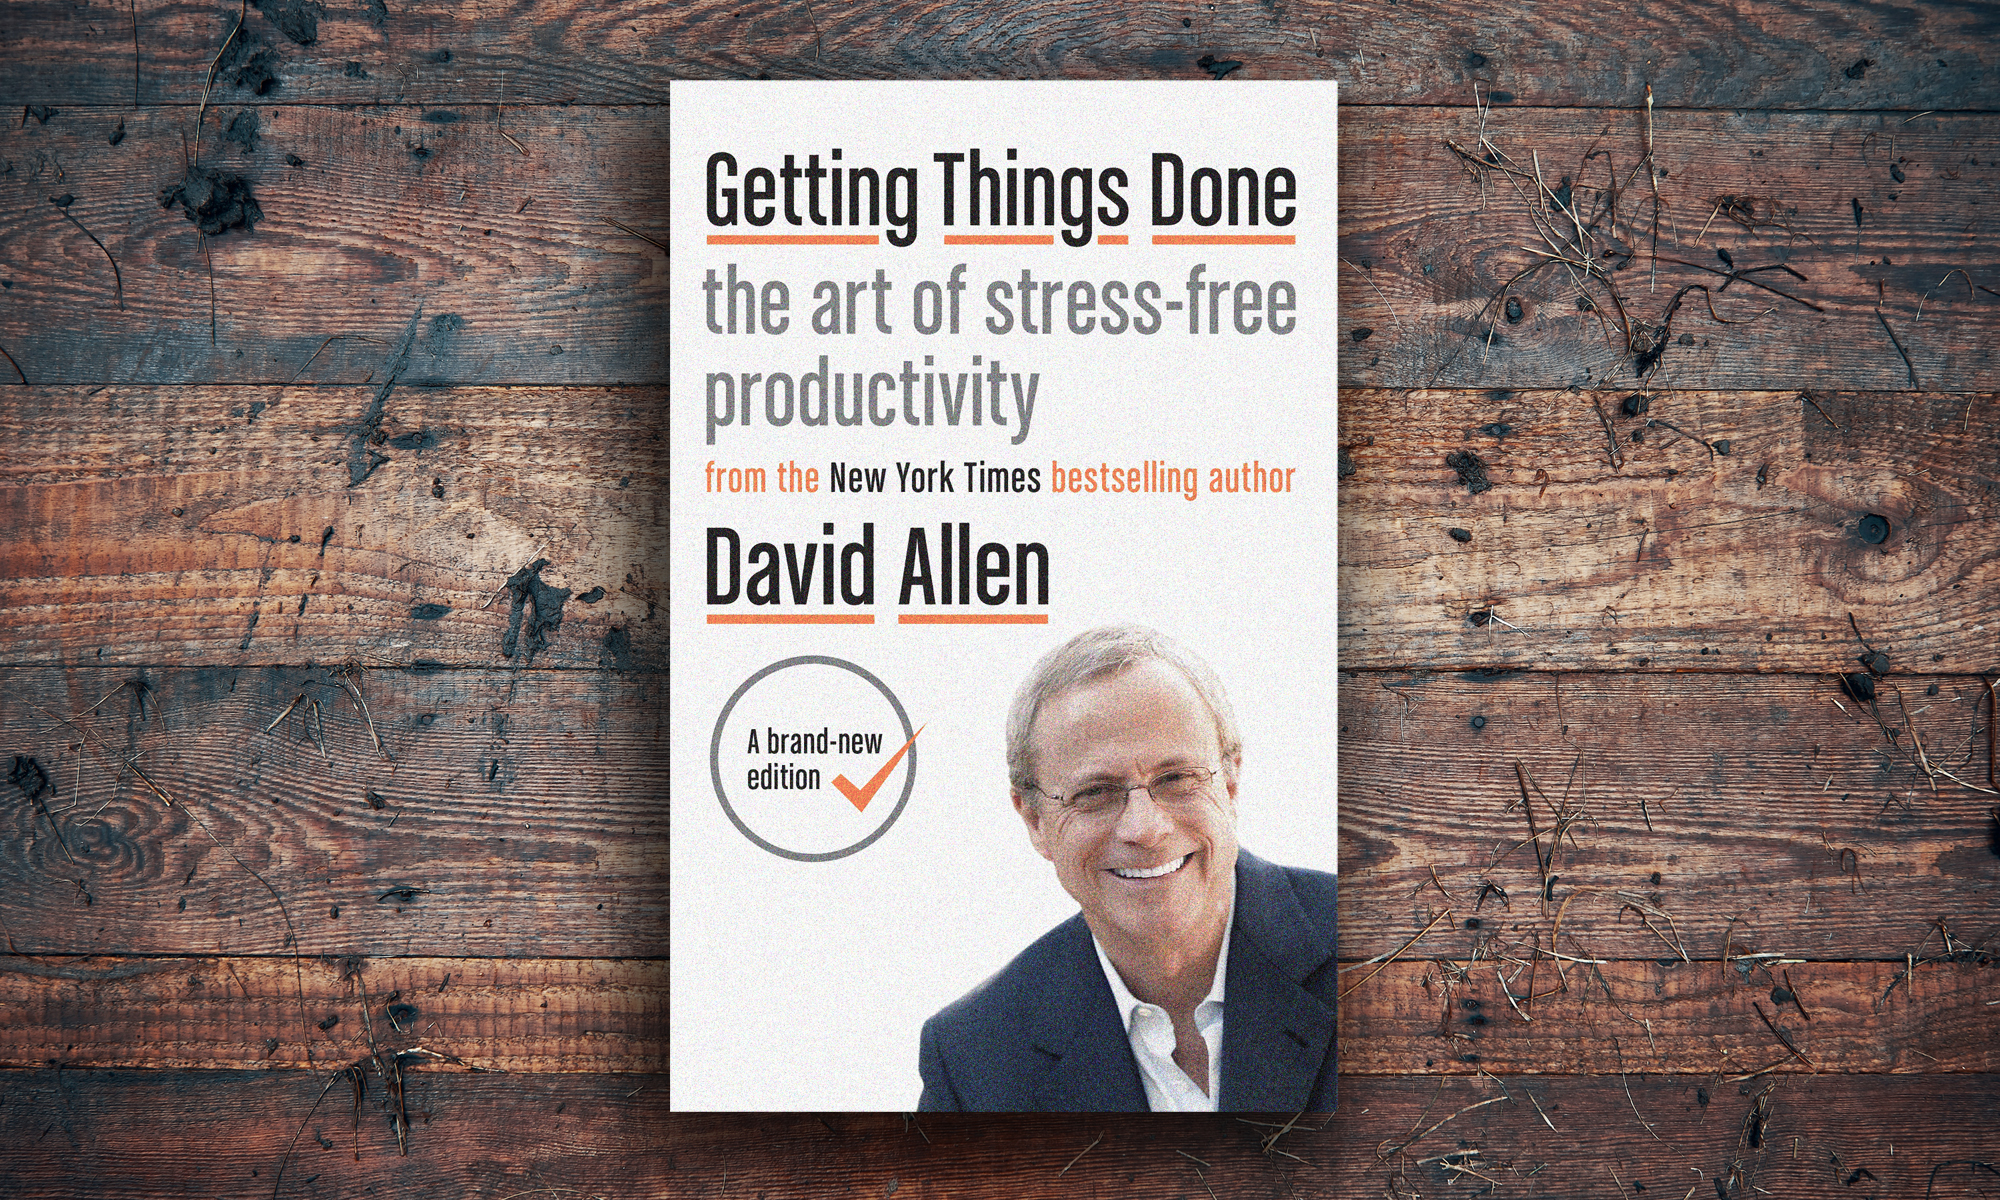 Cover of the book "Getting Things Done" by David Allen. Background by Michael Oeser on Unsplash